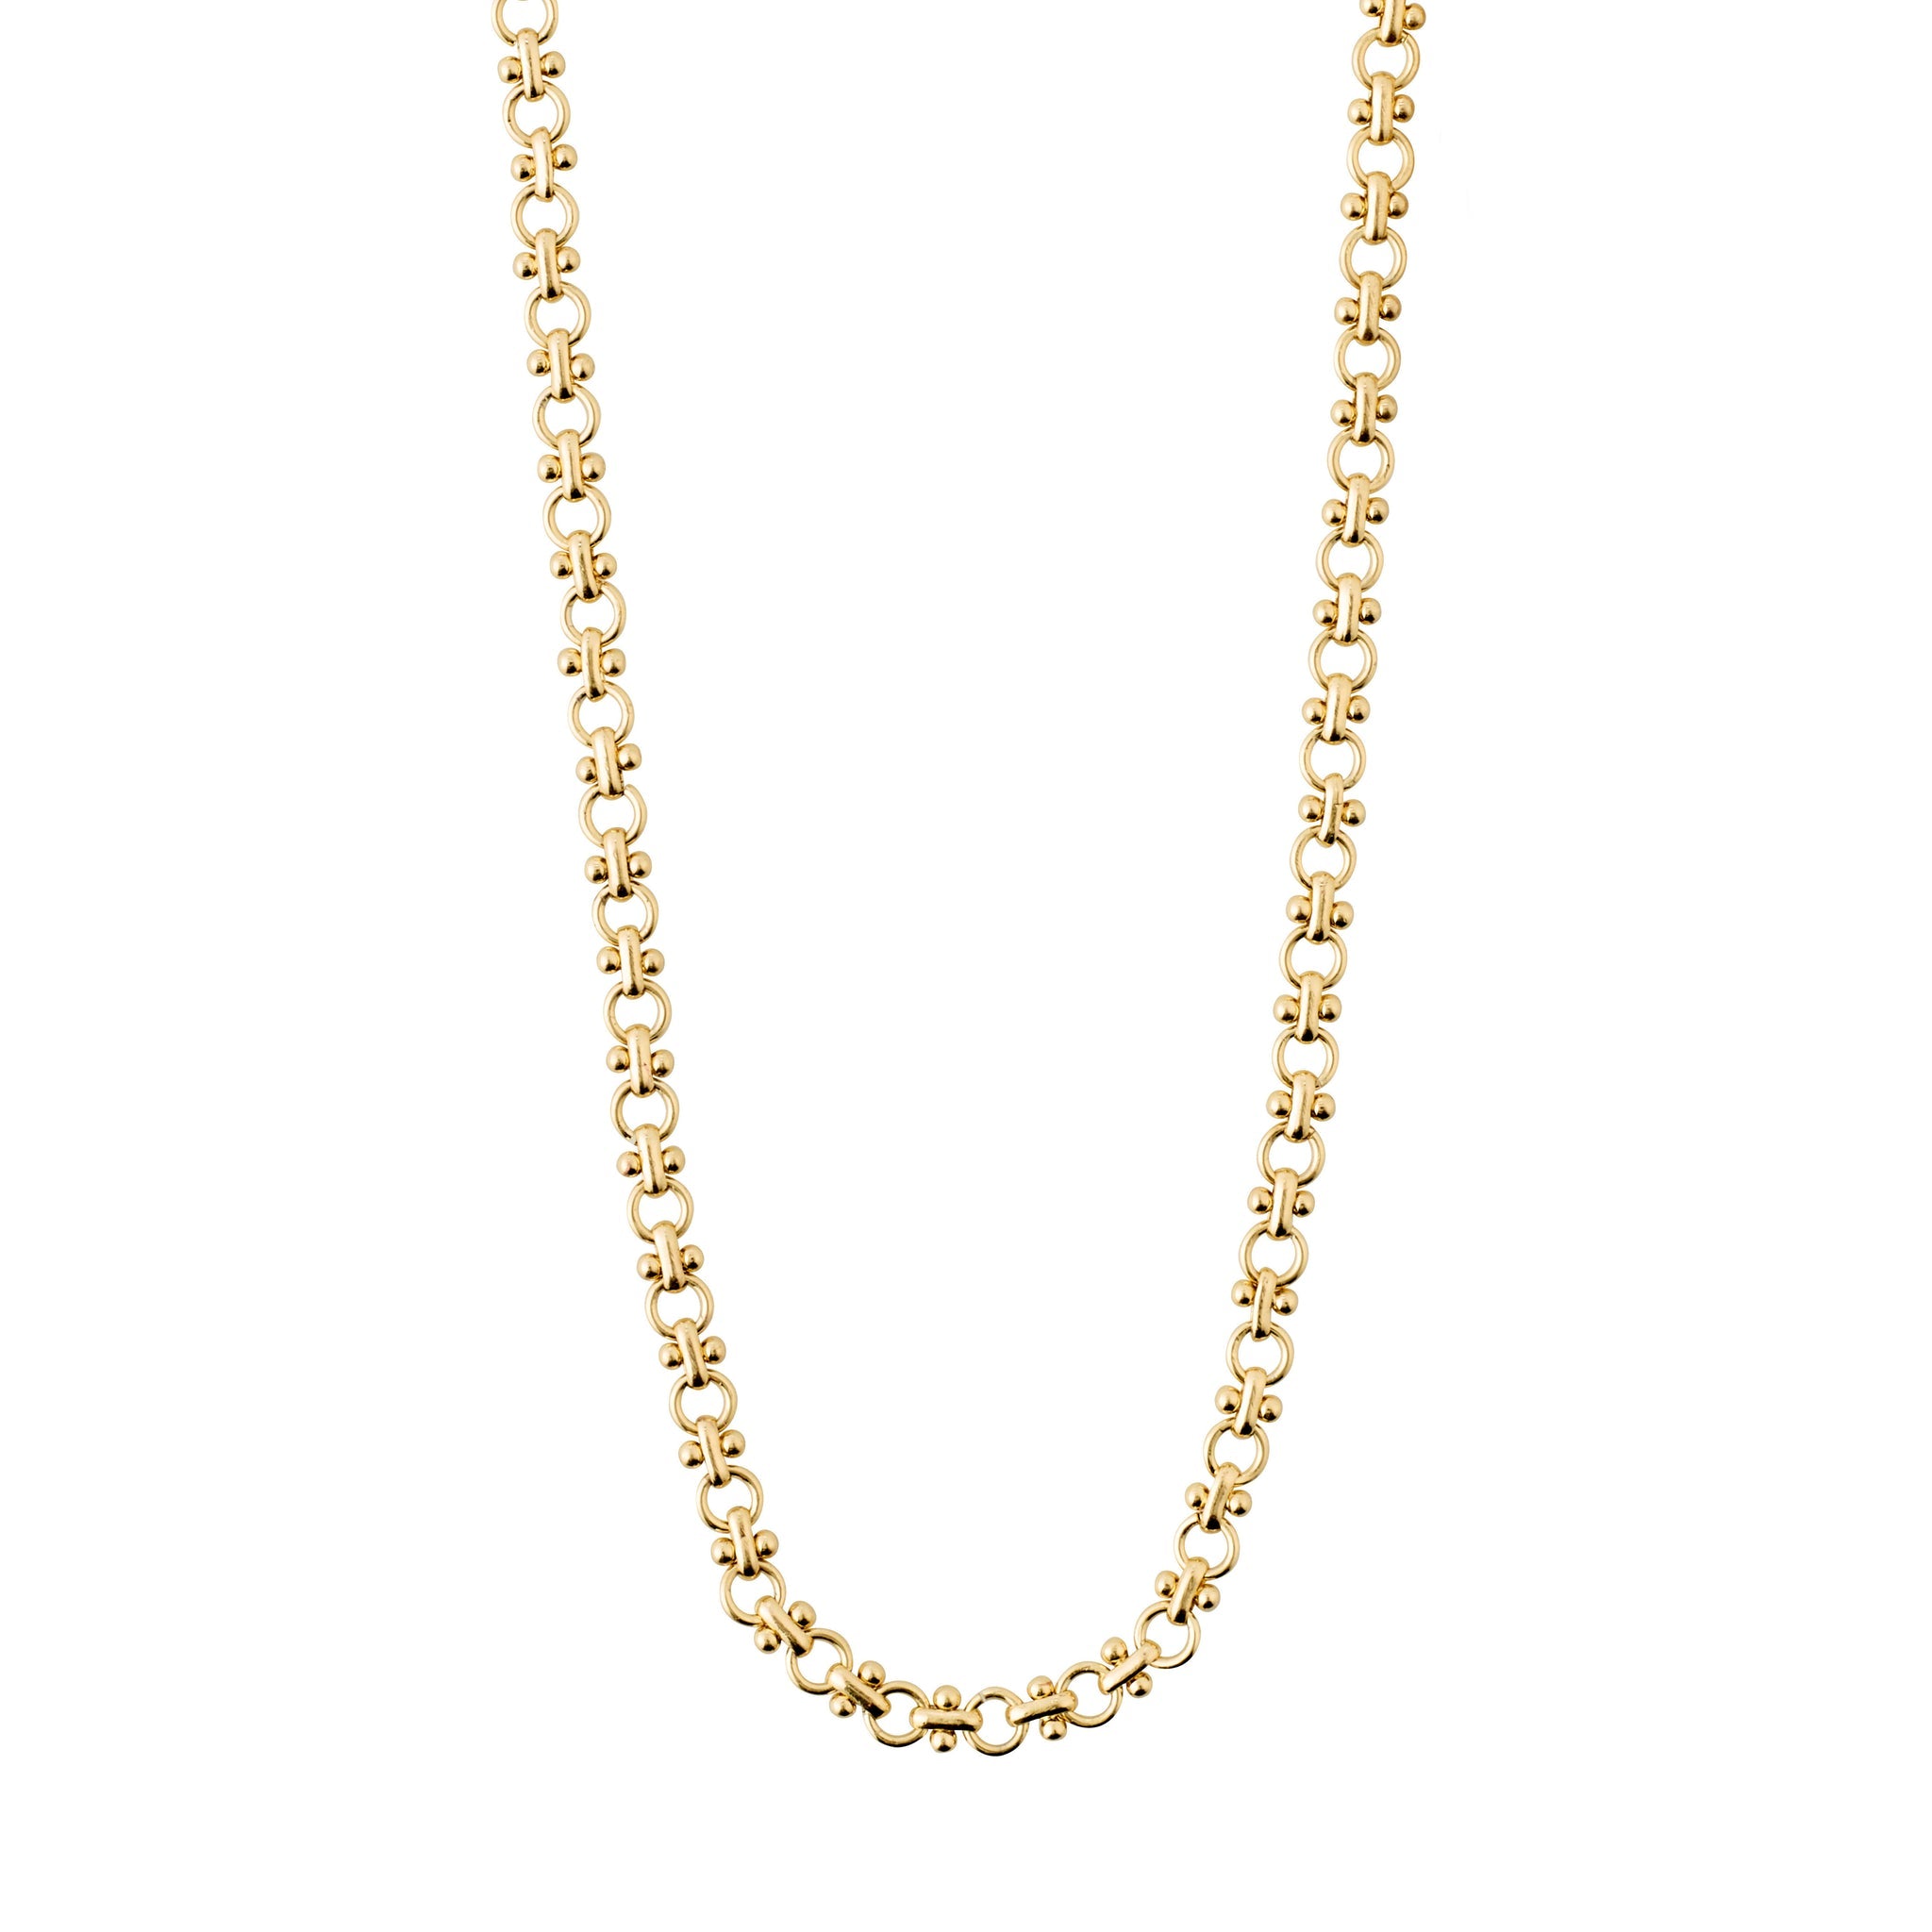 Nomad Necklace - Gold Plated